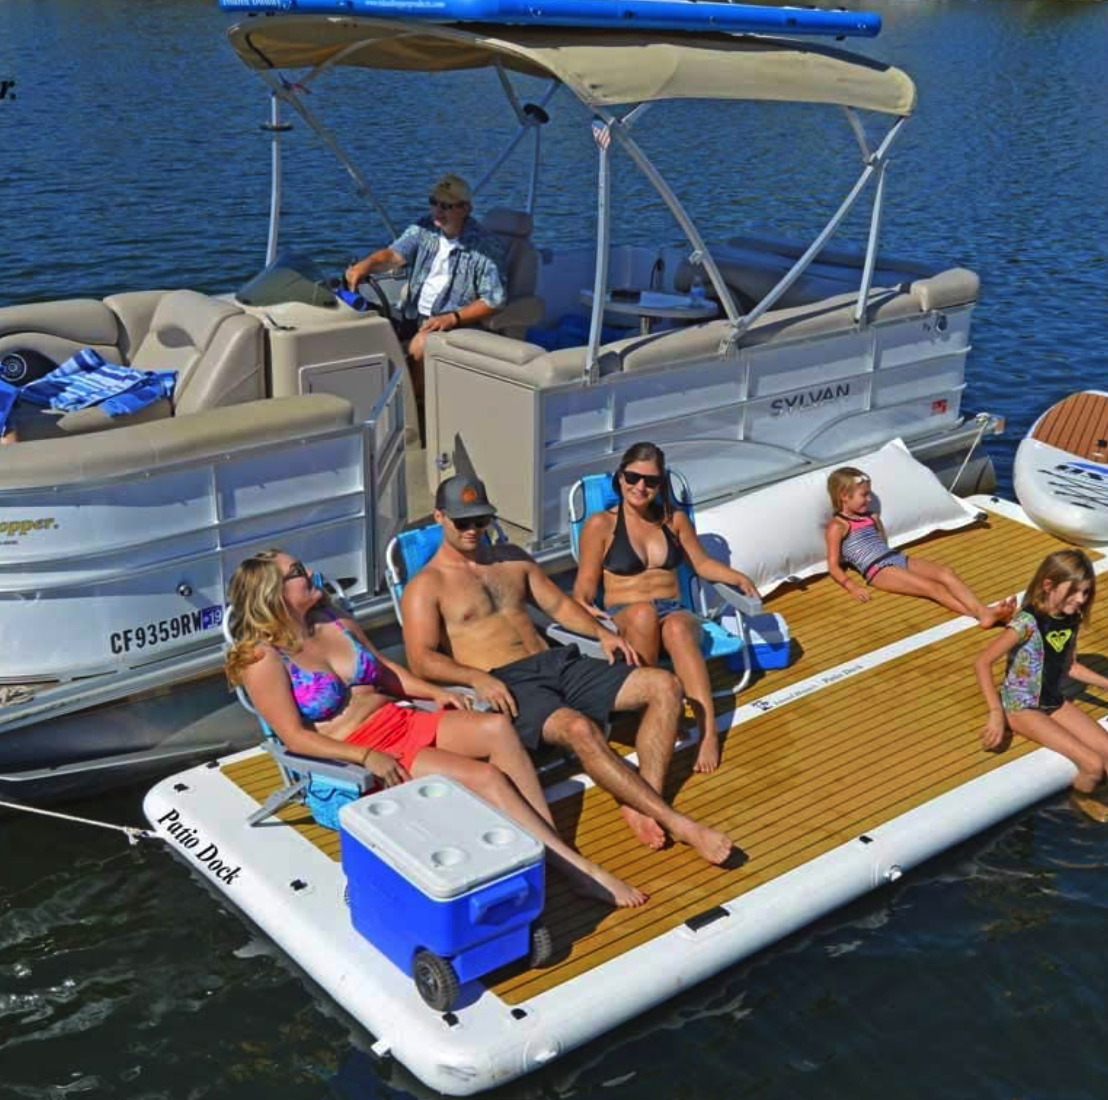 Amazon Is Selling an Inflatable Patio Dock That Can Hold up to 10 People